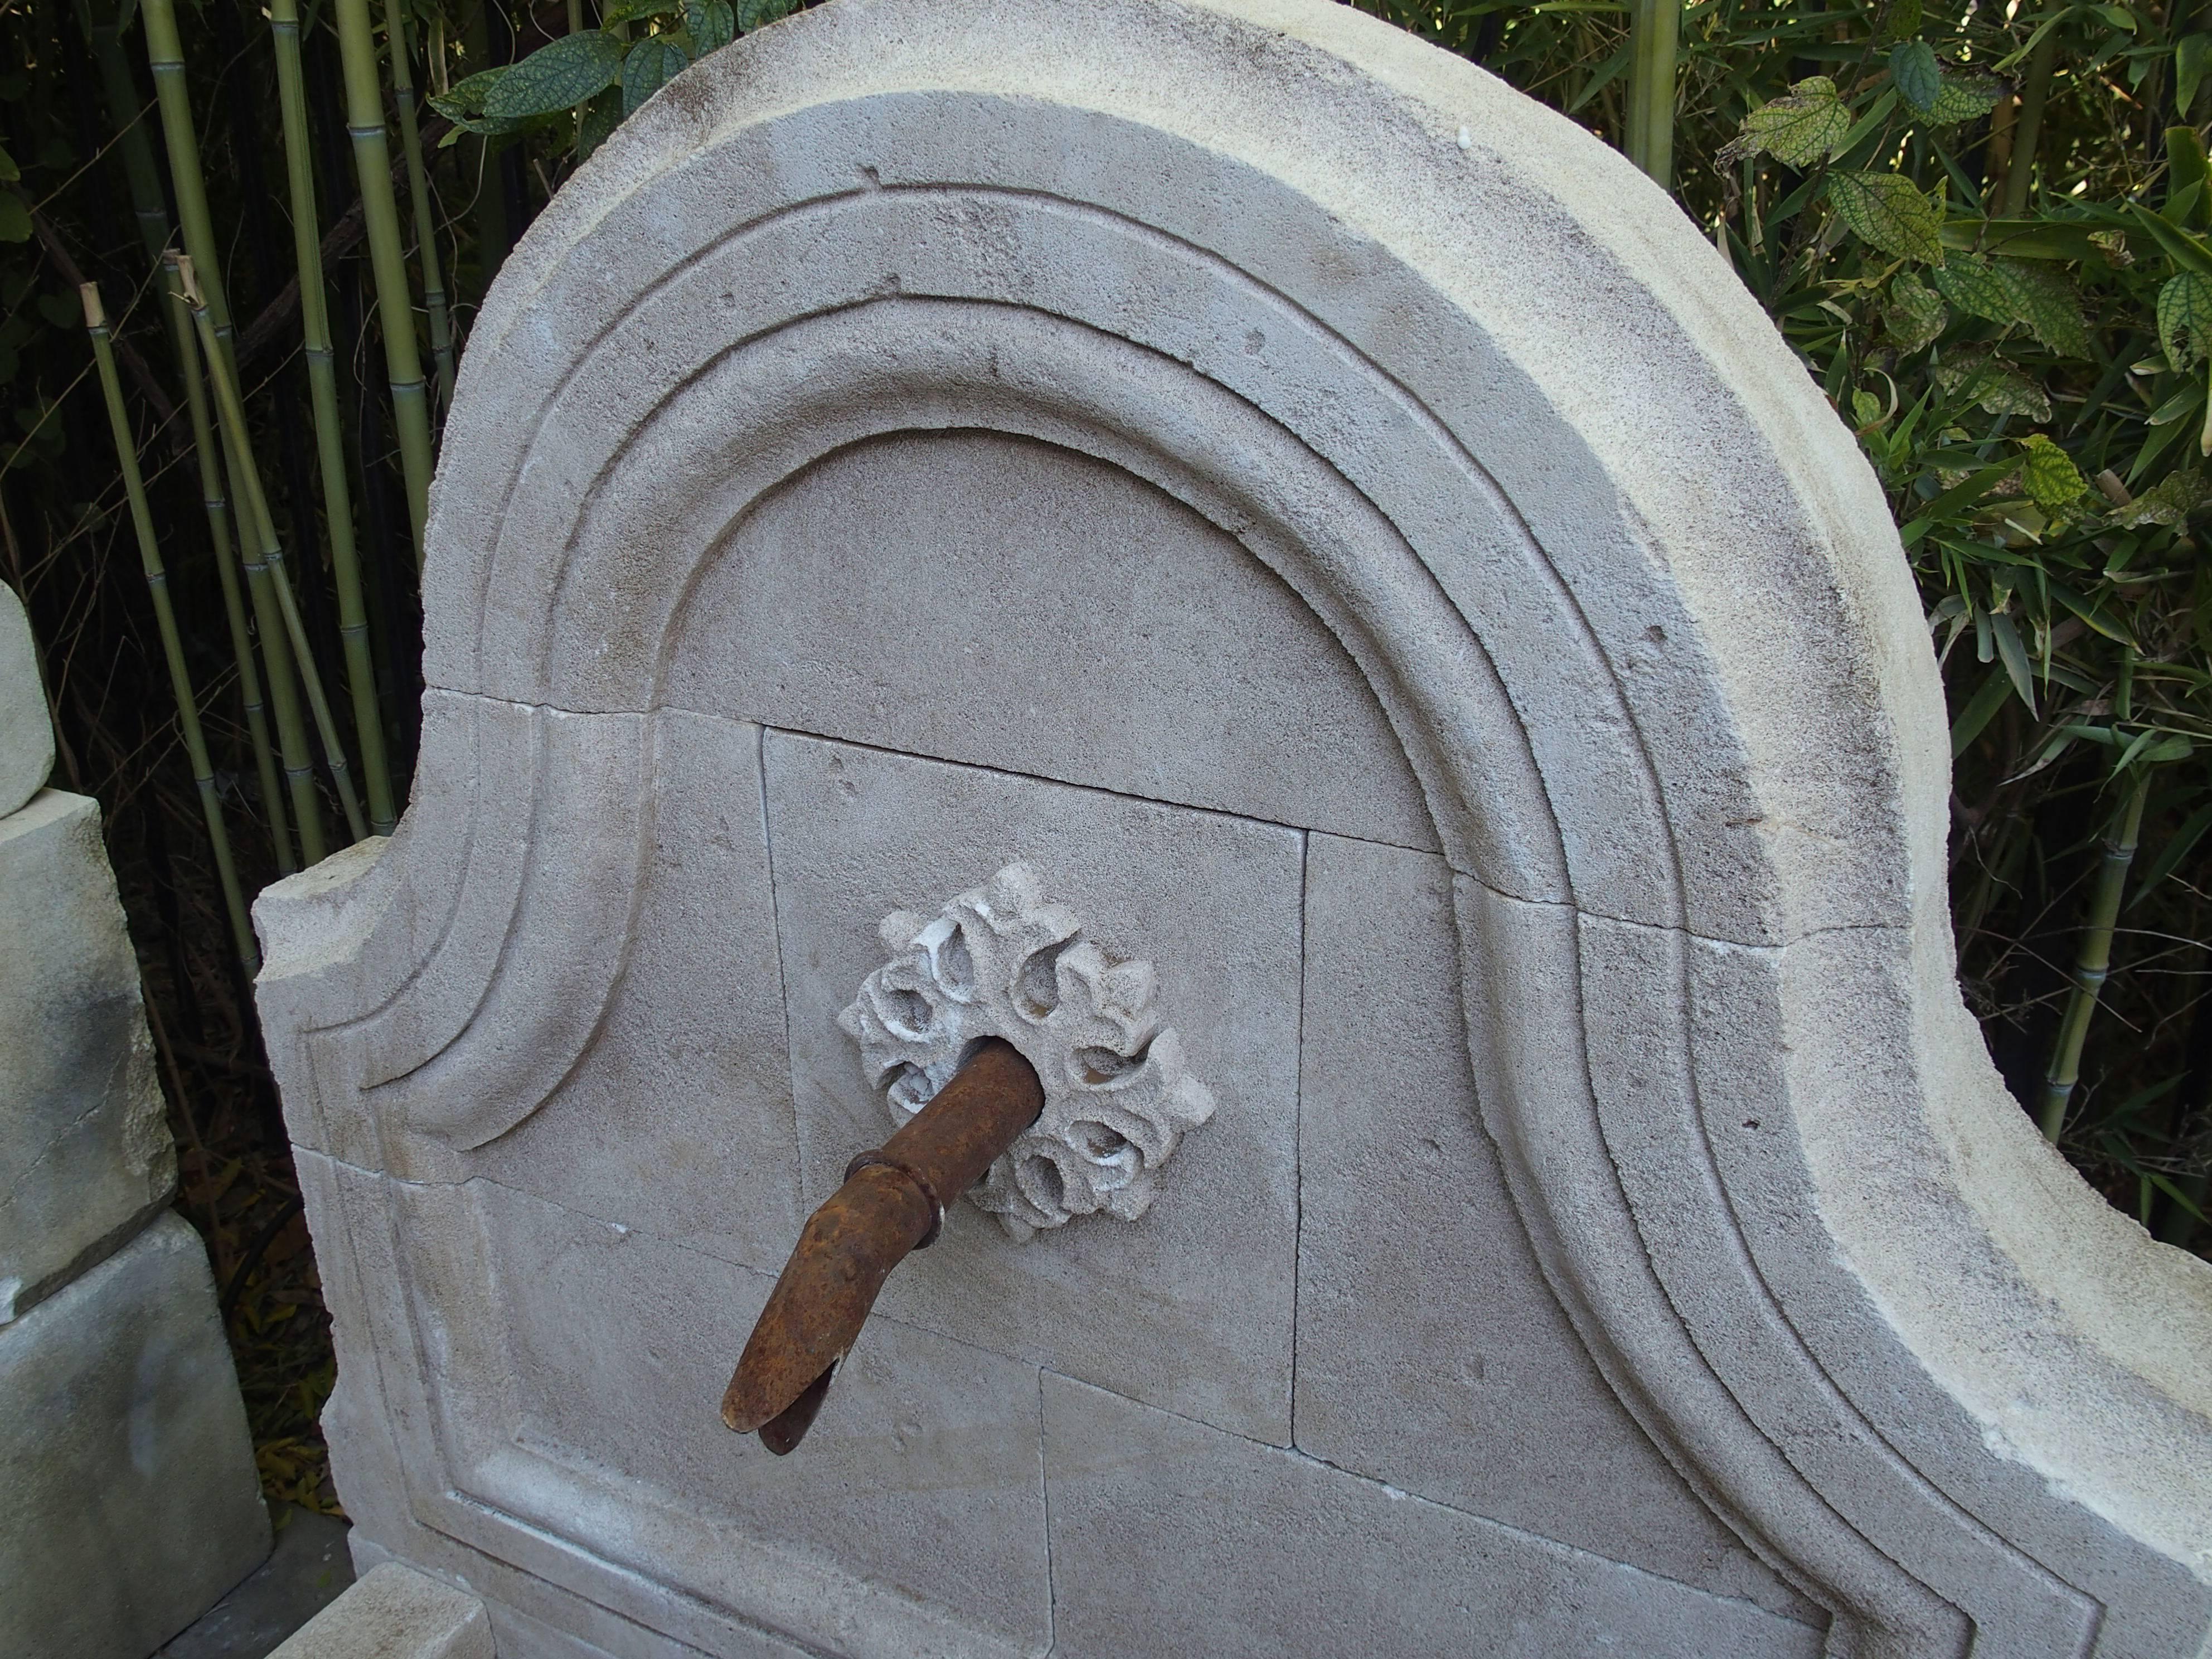 This small French wall fountain has been hand-carved and distressed out of solid French limestone. The back of the fountain has a unique, arched center panel with shaped moldings and incised frontal ornamentation. There is a rusted spout surrounded